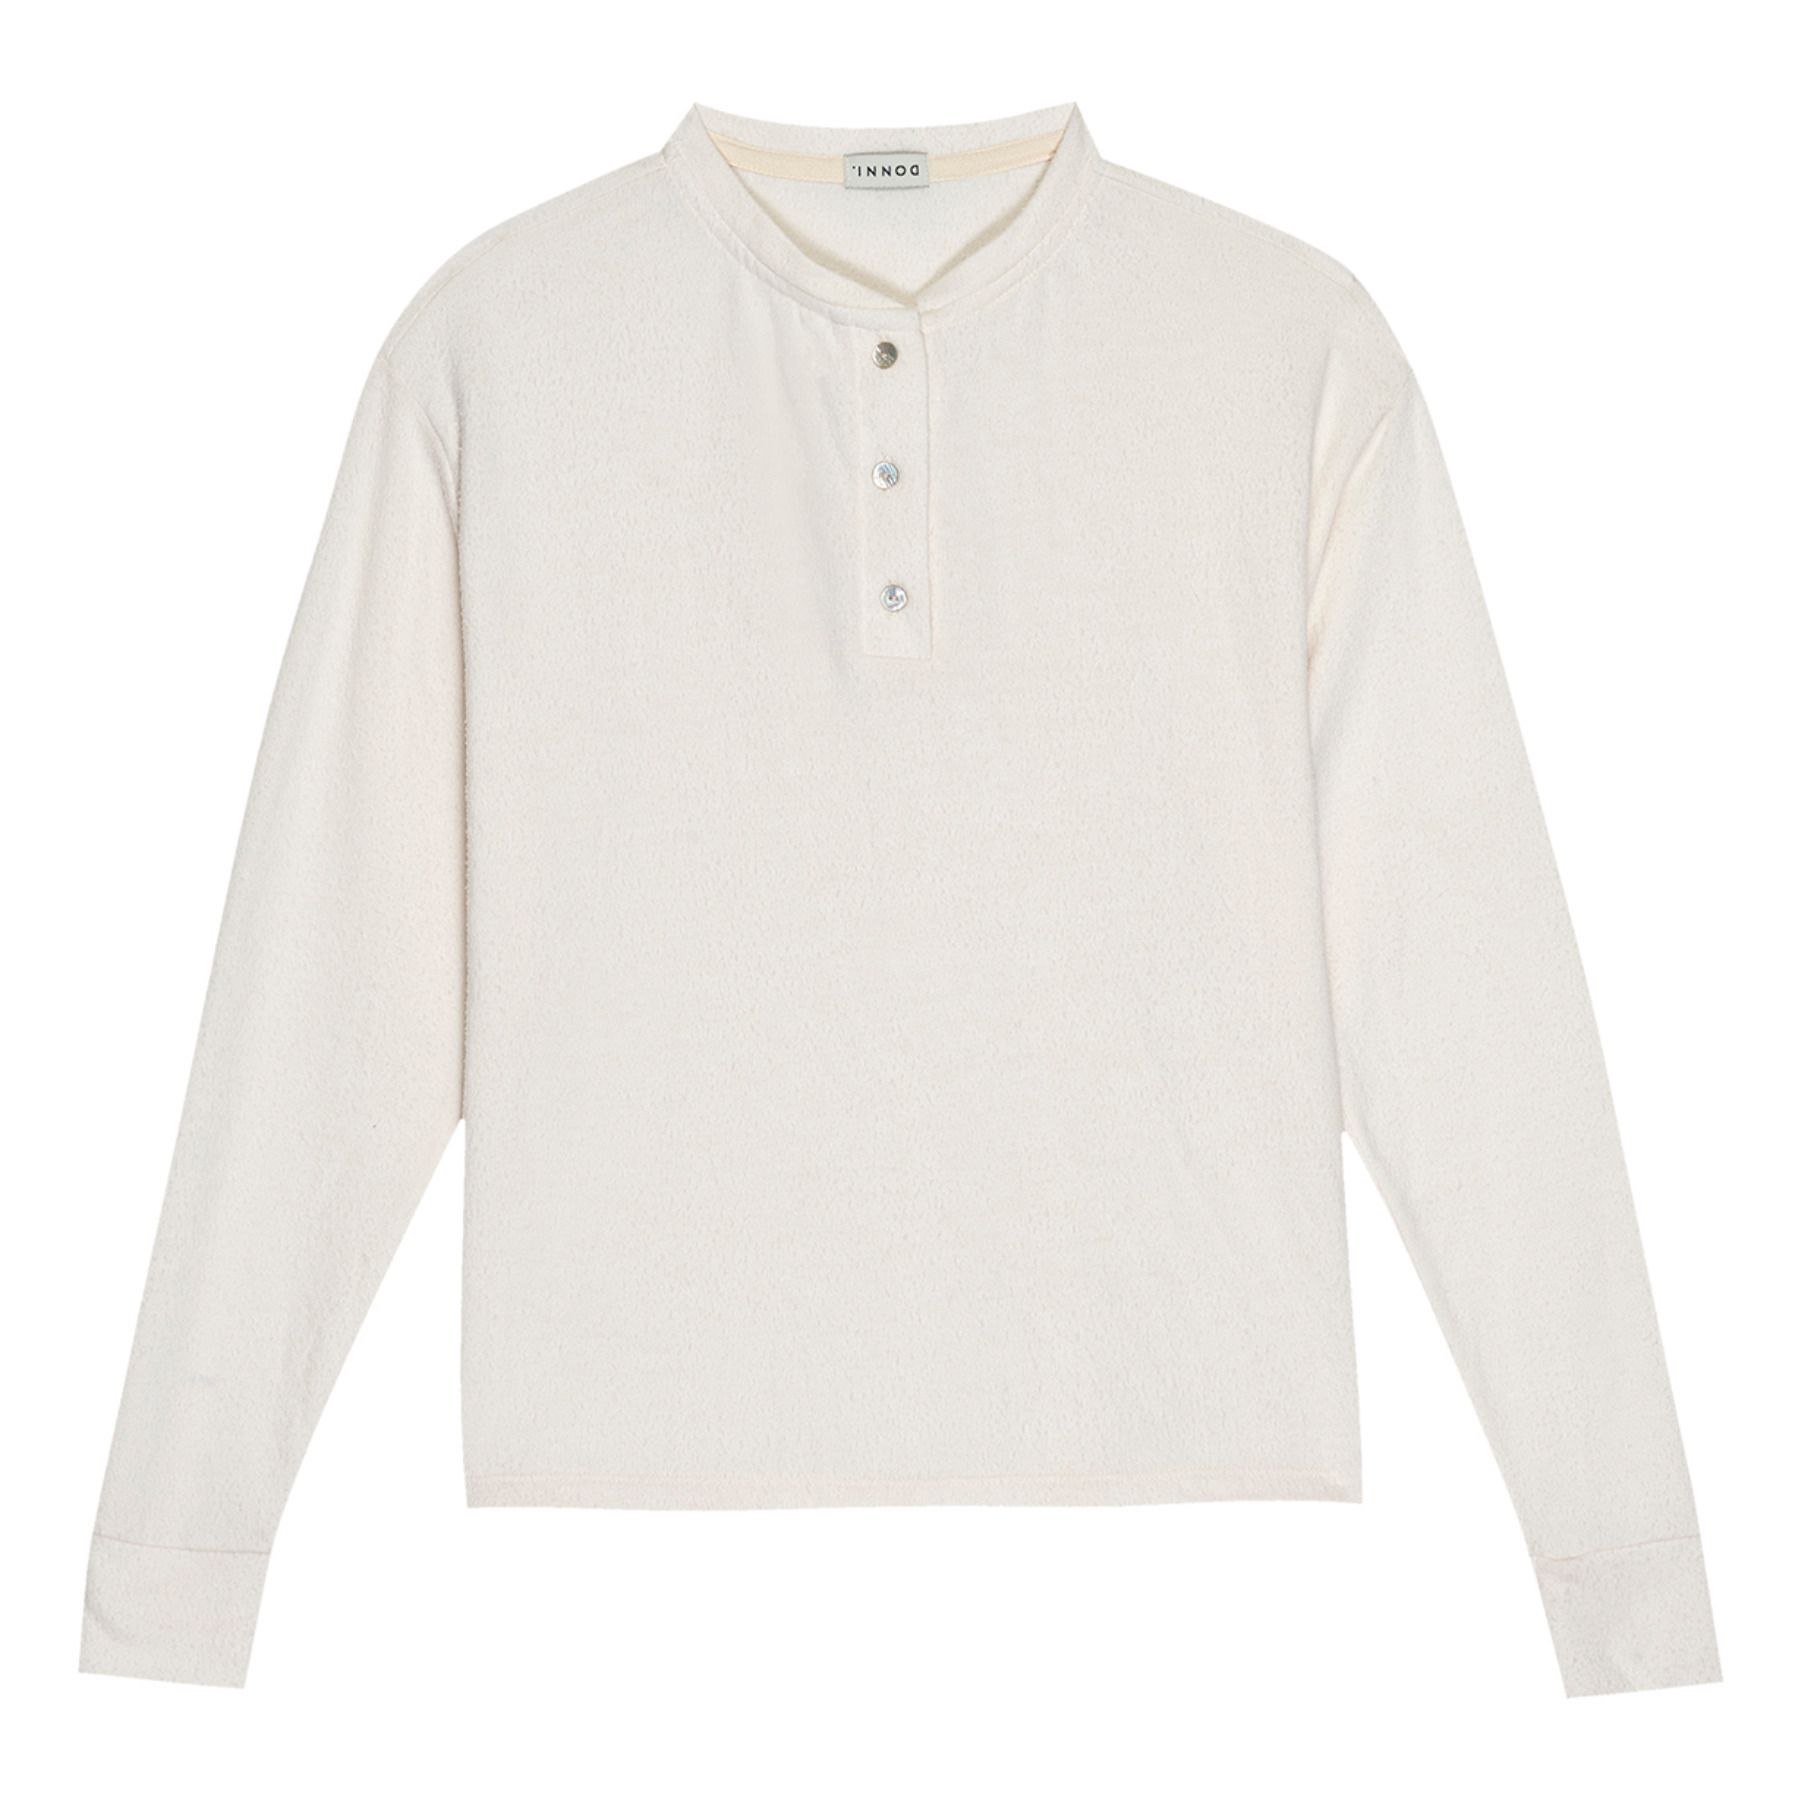 Donni - Pull Henley - Femme - Crème